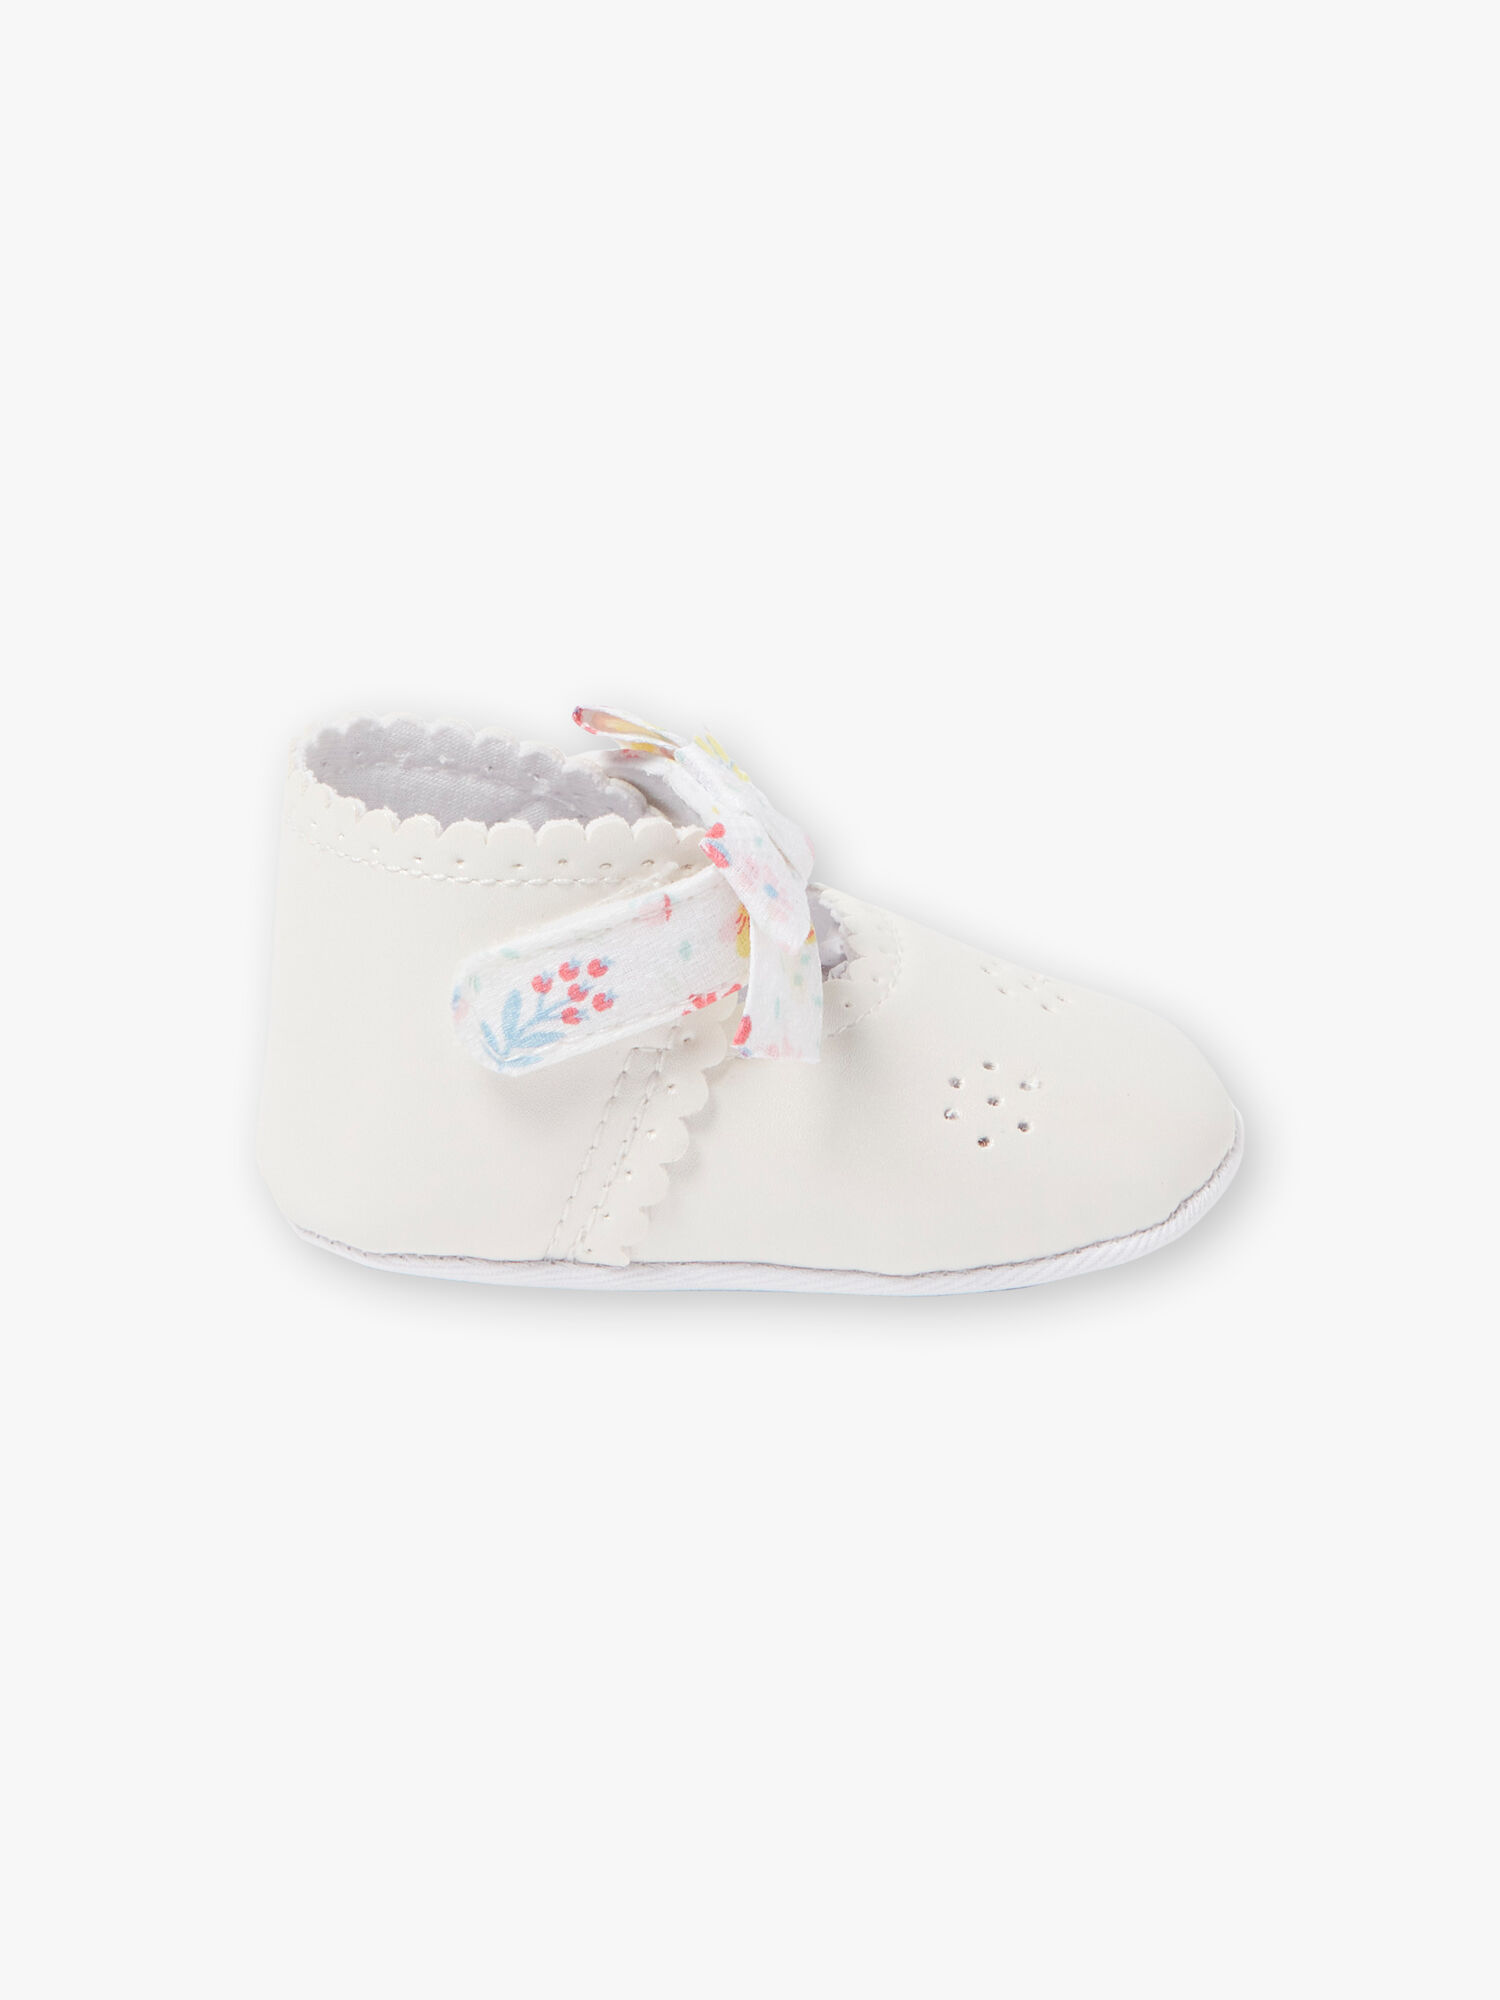 lacoste baby girl shoes